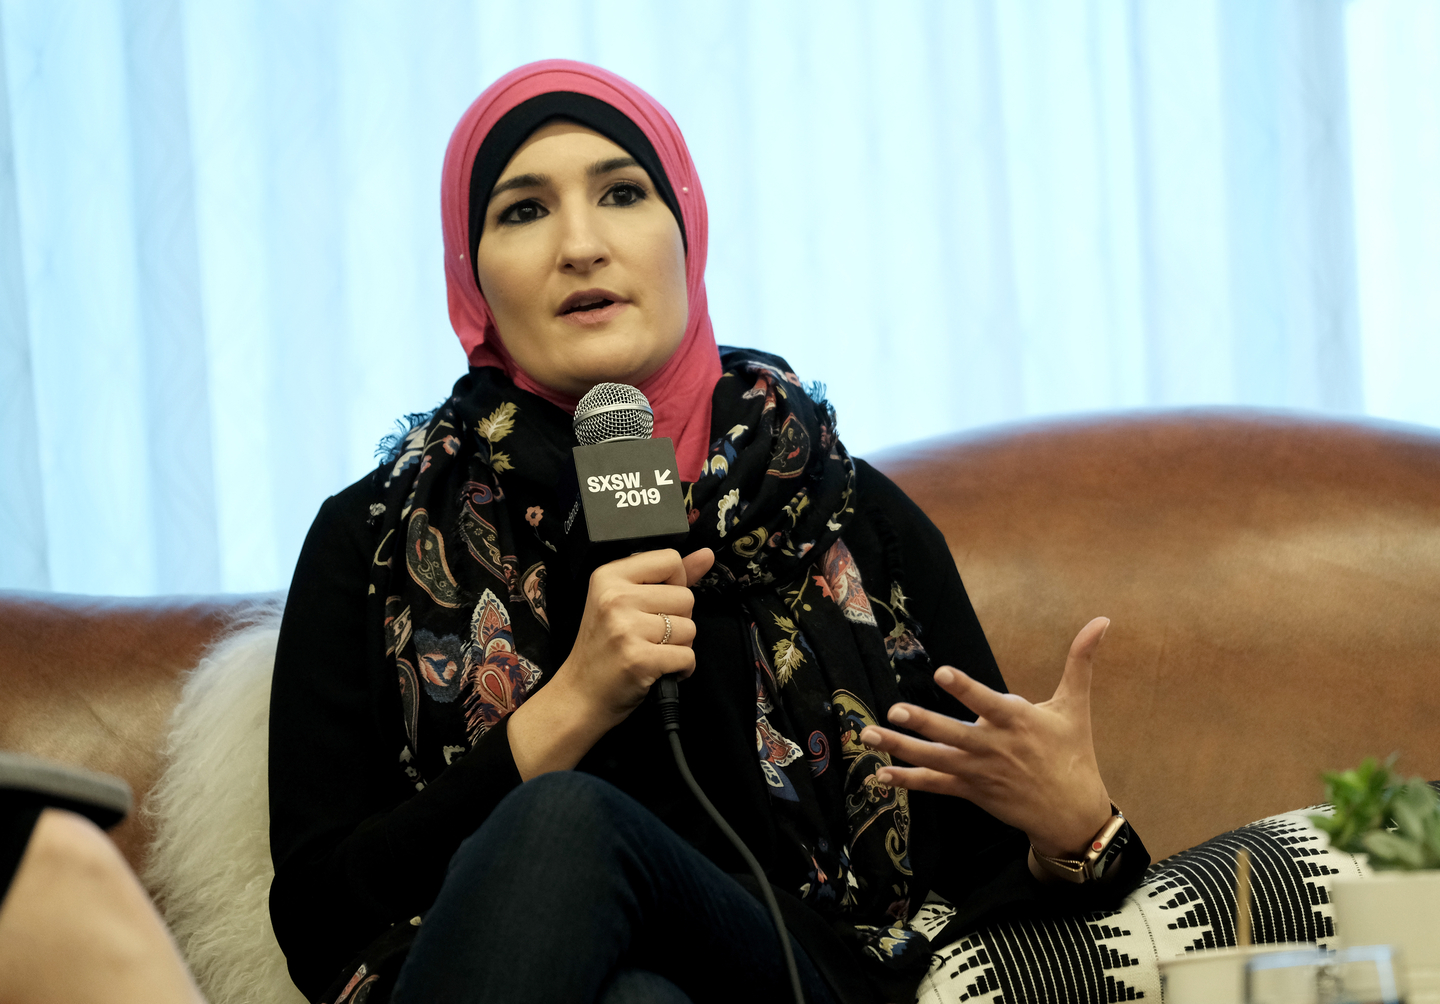 Linda Sarsour at the Mothers of the Resistance: Women Leading the Movement podcast – Photo by Rita Quinn/Getty Images for SXSW